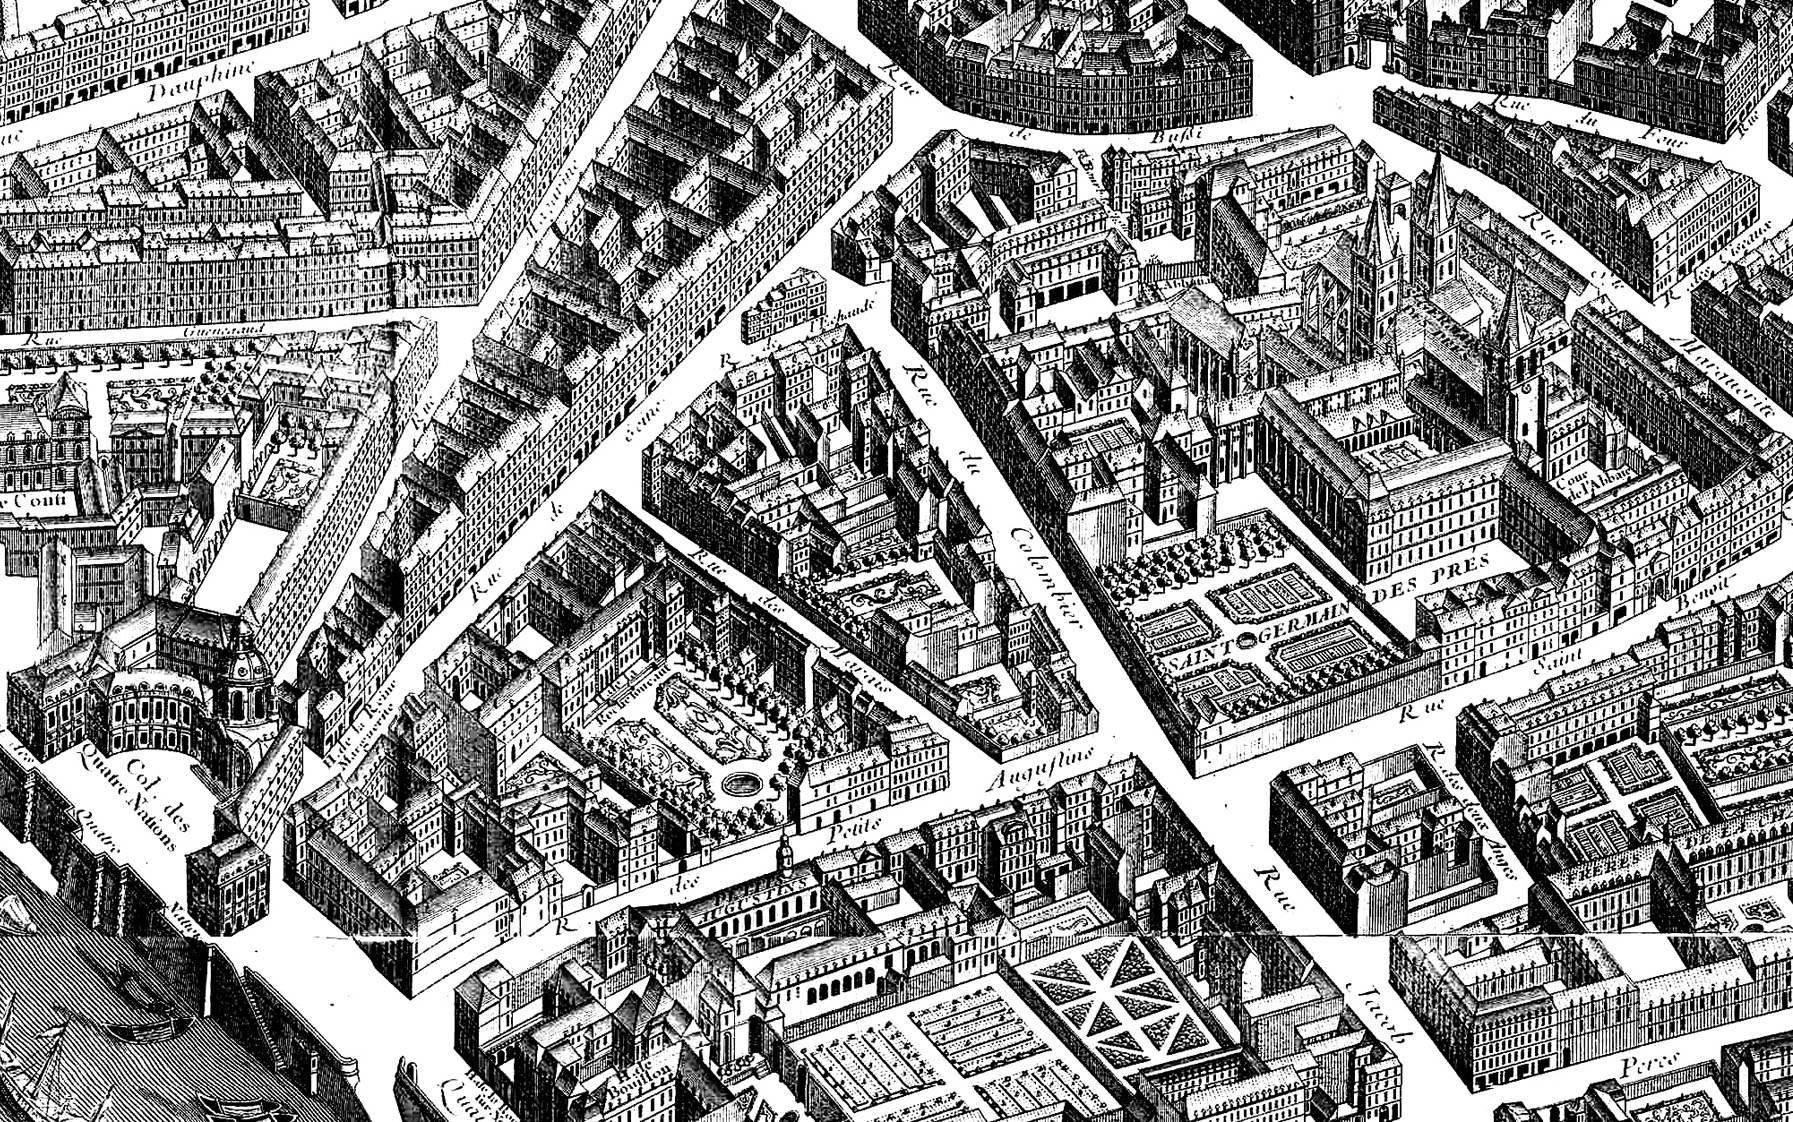 Free coloring page coloring-map-paris-neighborhood-1739. Difficult coloring page for adult made from a map of a Paris neighborhood, dating from 1739. Many details to color one by one